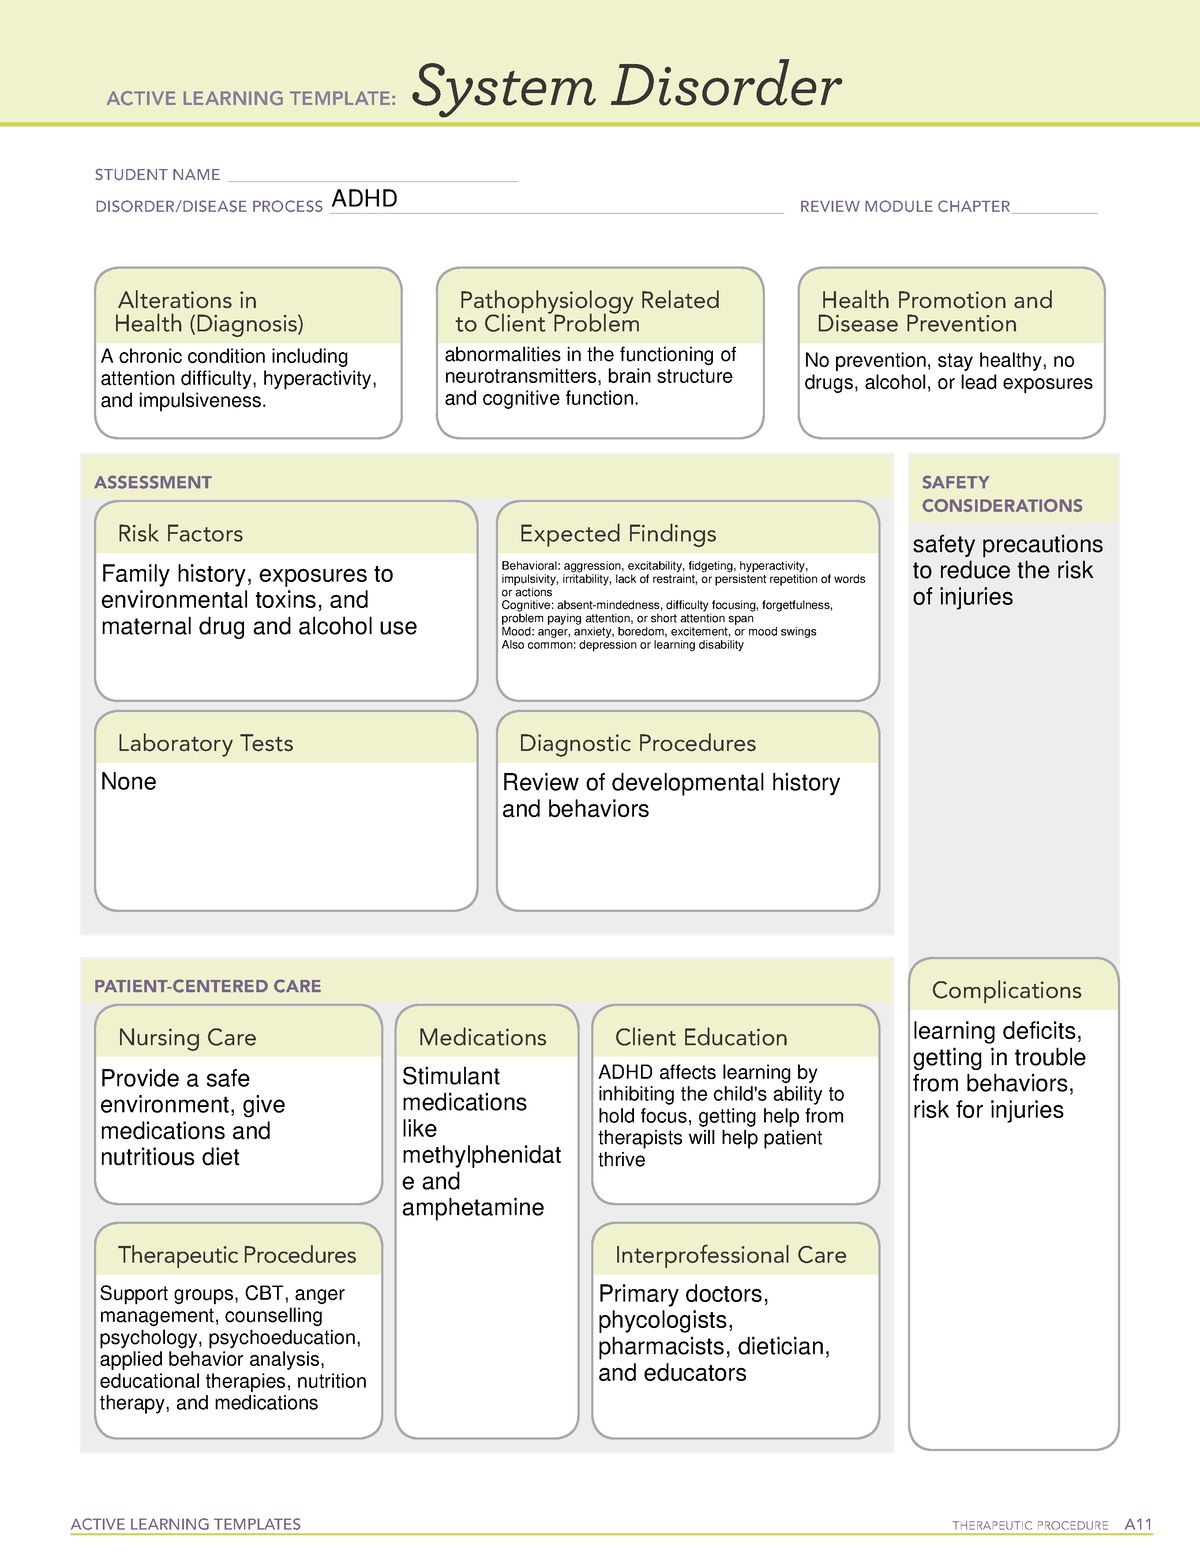 adhd-system-disorder-template-ati-active-learning-template-system